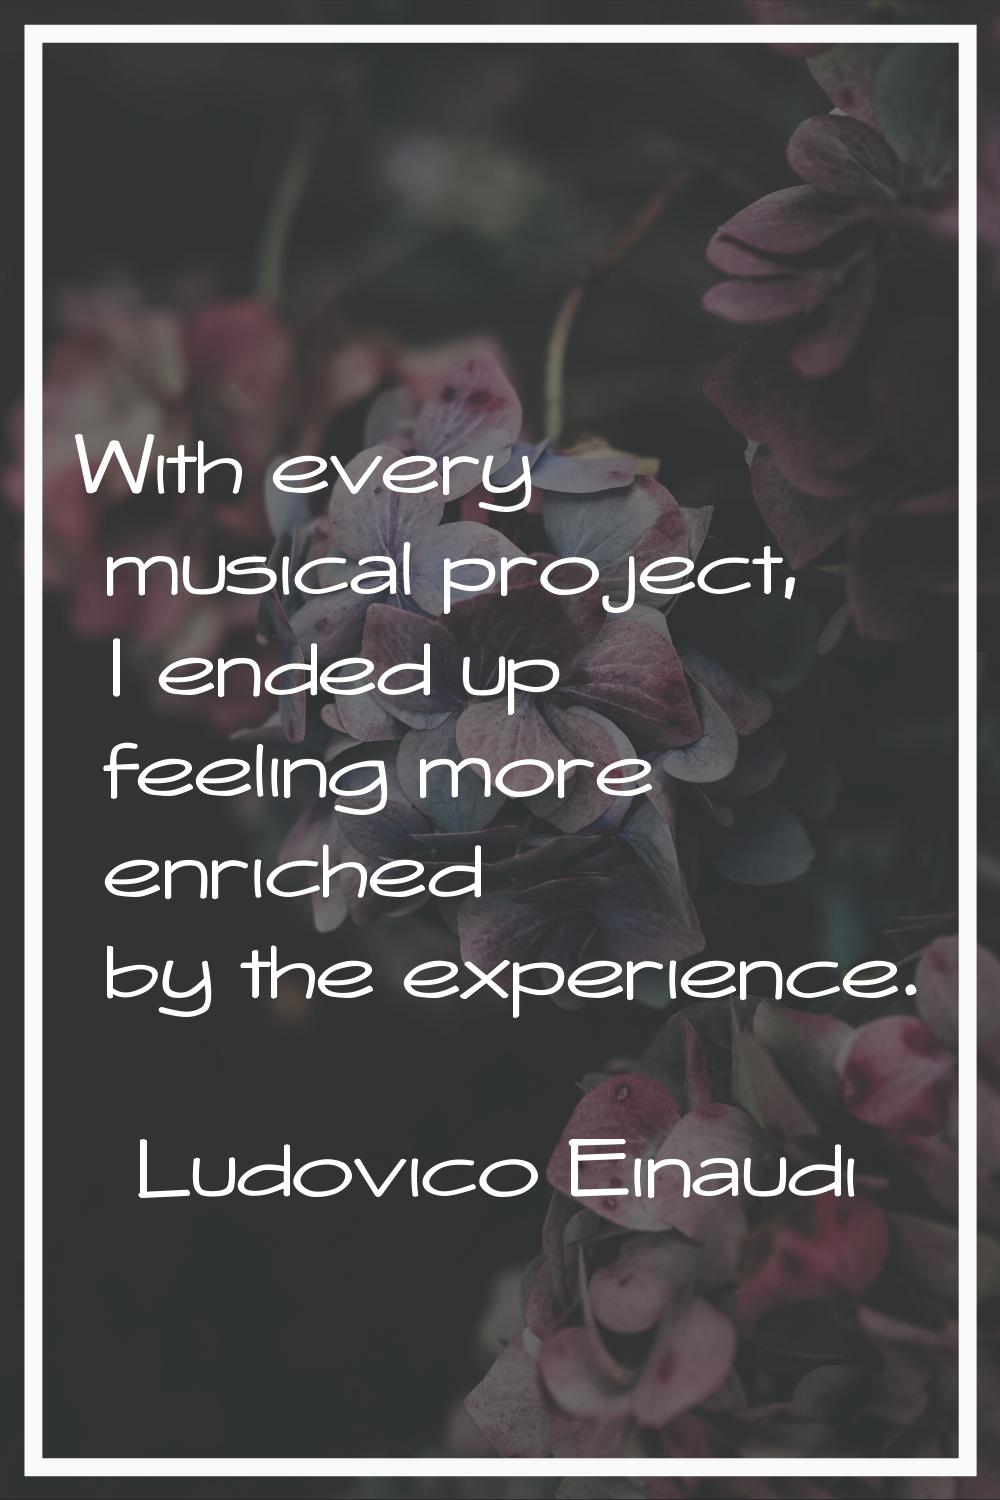 With every musical project, I ended up feeling more enriched by the experience.